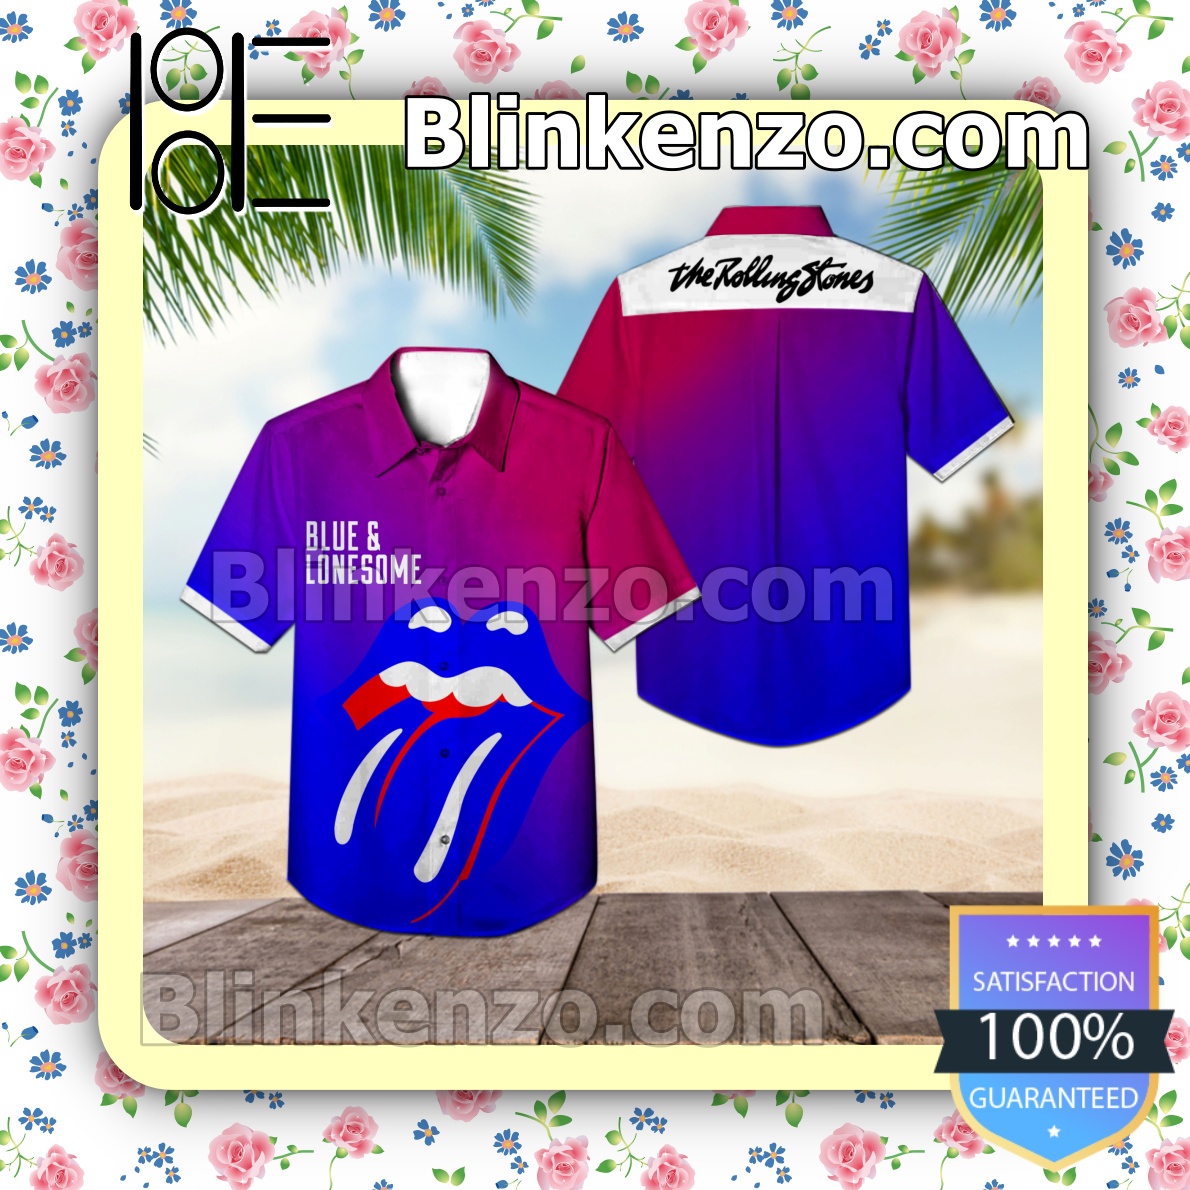 Blue And Lonesome Album By The Rolling Stones Summer Beach Shirt